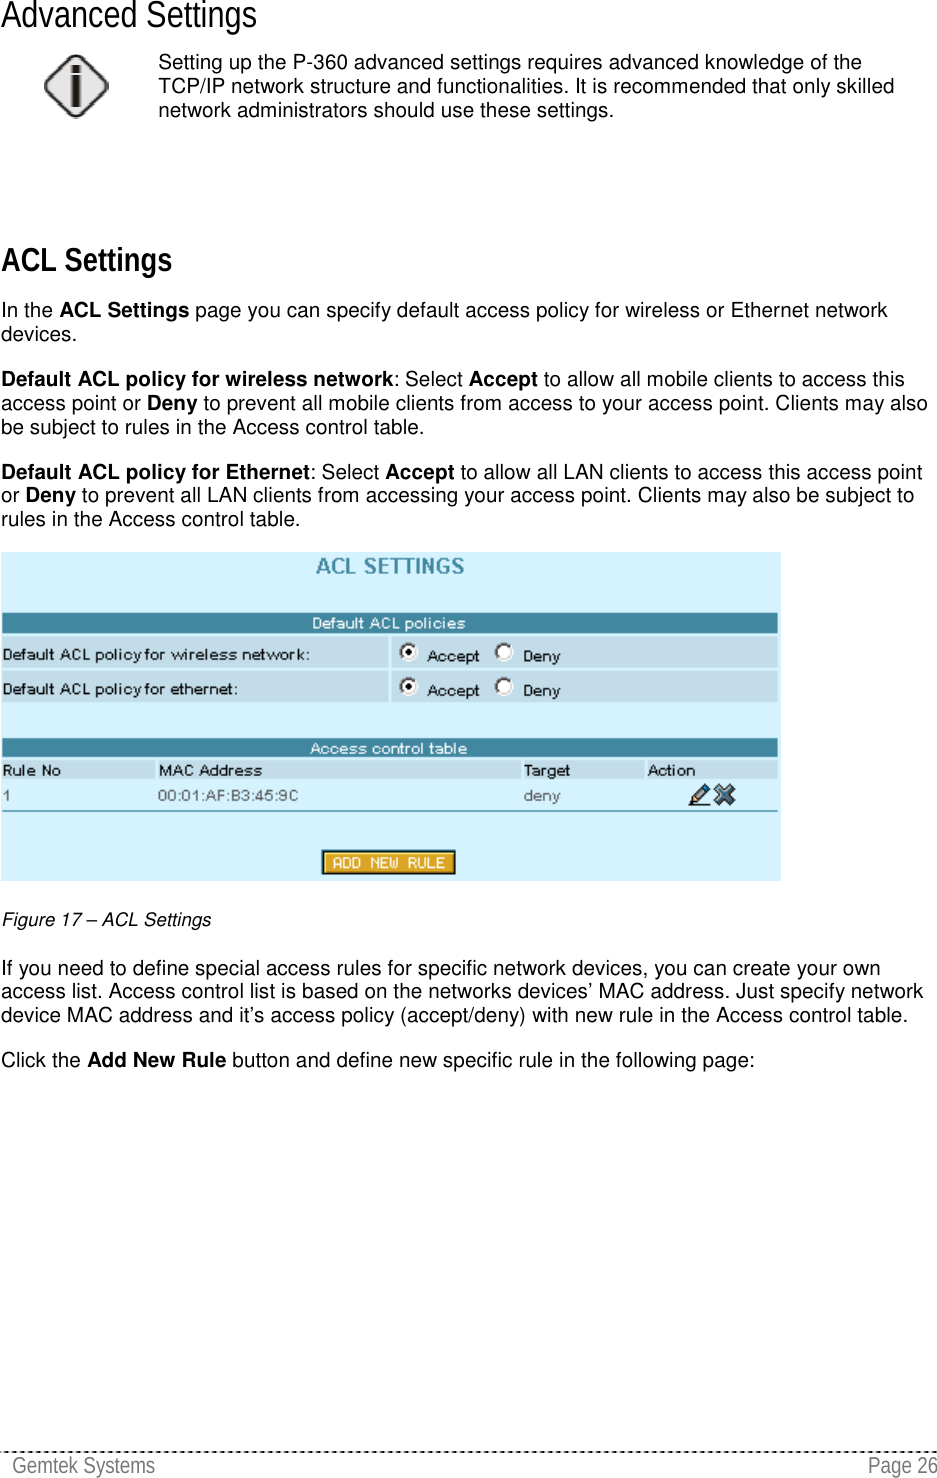 Gemtek Systems Page 26Advanced SettingsSetting up the P-360 advanced settings requires advanced knowledge of theTCP/IP network structure and functionalities. It is recommended that only skillednetwork administrators should use these settings.ACL SettingsIn the ACL Settings page you can specify default access policy for wireless or Ethernet networkdevices.Default ACL policy for wireless network: Select Accept to allow all mobile clients to access thisaccess point or Deny to prevent all mobile clients from access to your access point. Clients may alsobe subject to rules in the Access control table.Default ACL policy for Ethernet: Select Accept to allow all LAN clients to access this access pointor Deny to prevent all LAN clients from accessing your access point. Clients may also be subject torules in the Access control table.Figure 17 – ACL SettingsIf you need to define special access rules for specific network devices, you can create your ownaccess list. Access control list is based on the networks devices’ MAC address. Just specify networkdevice MAC address and it’s access policy (accept/deny) with new rule in the Access control table.Click the Add New Rule button and define new specific rule in the following page: